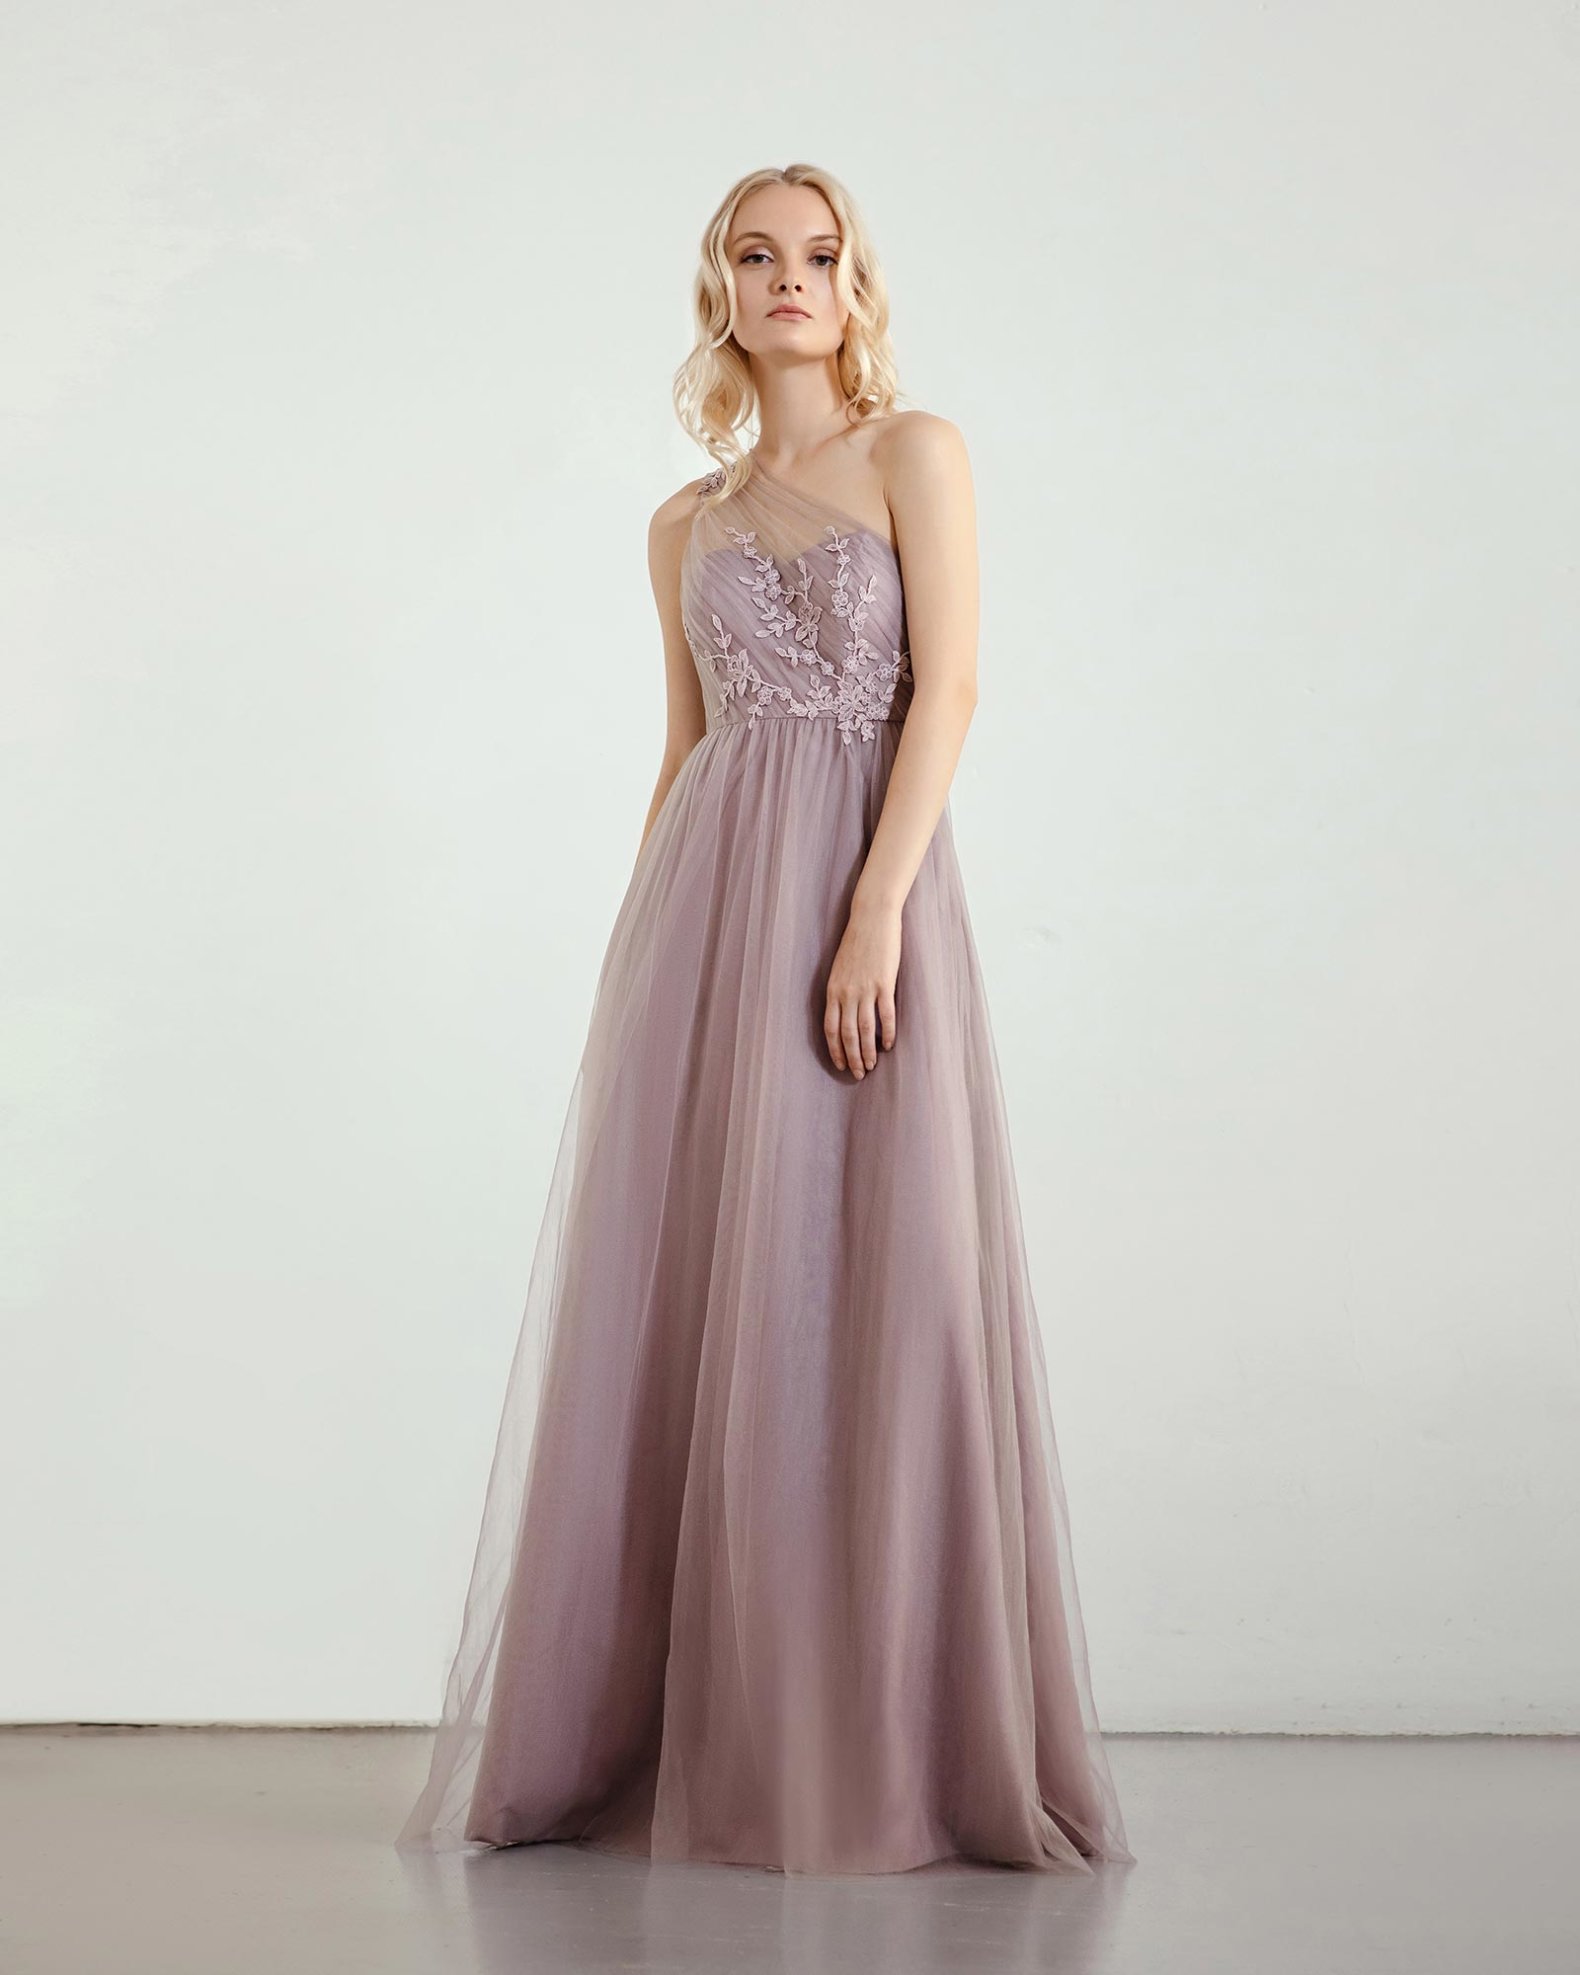 7 Big Bridesmaid Dress Trends for 2020 (With Recommendations ...